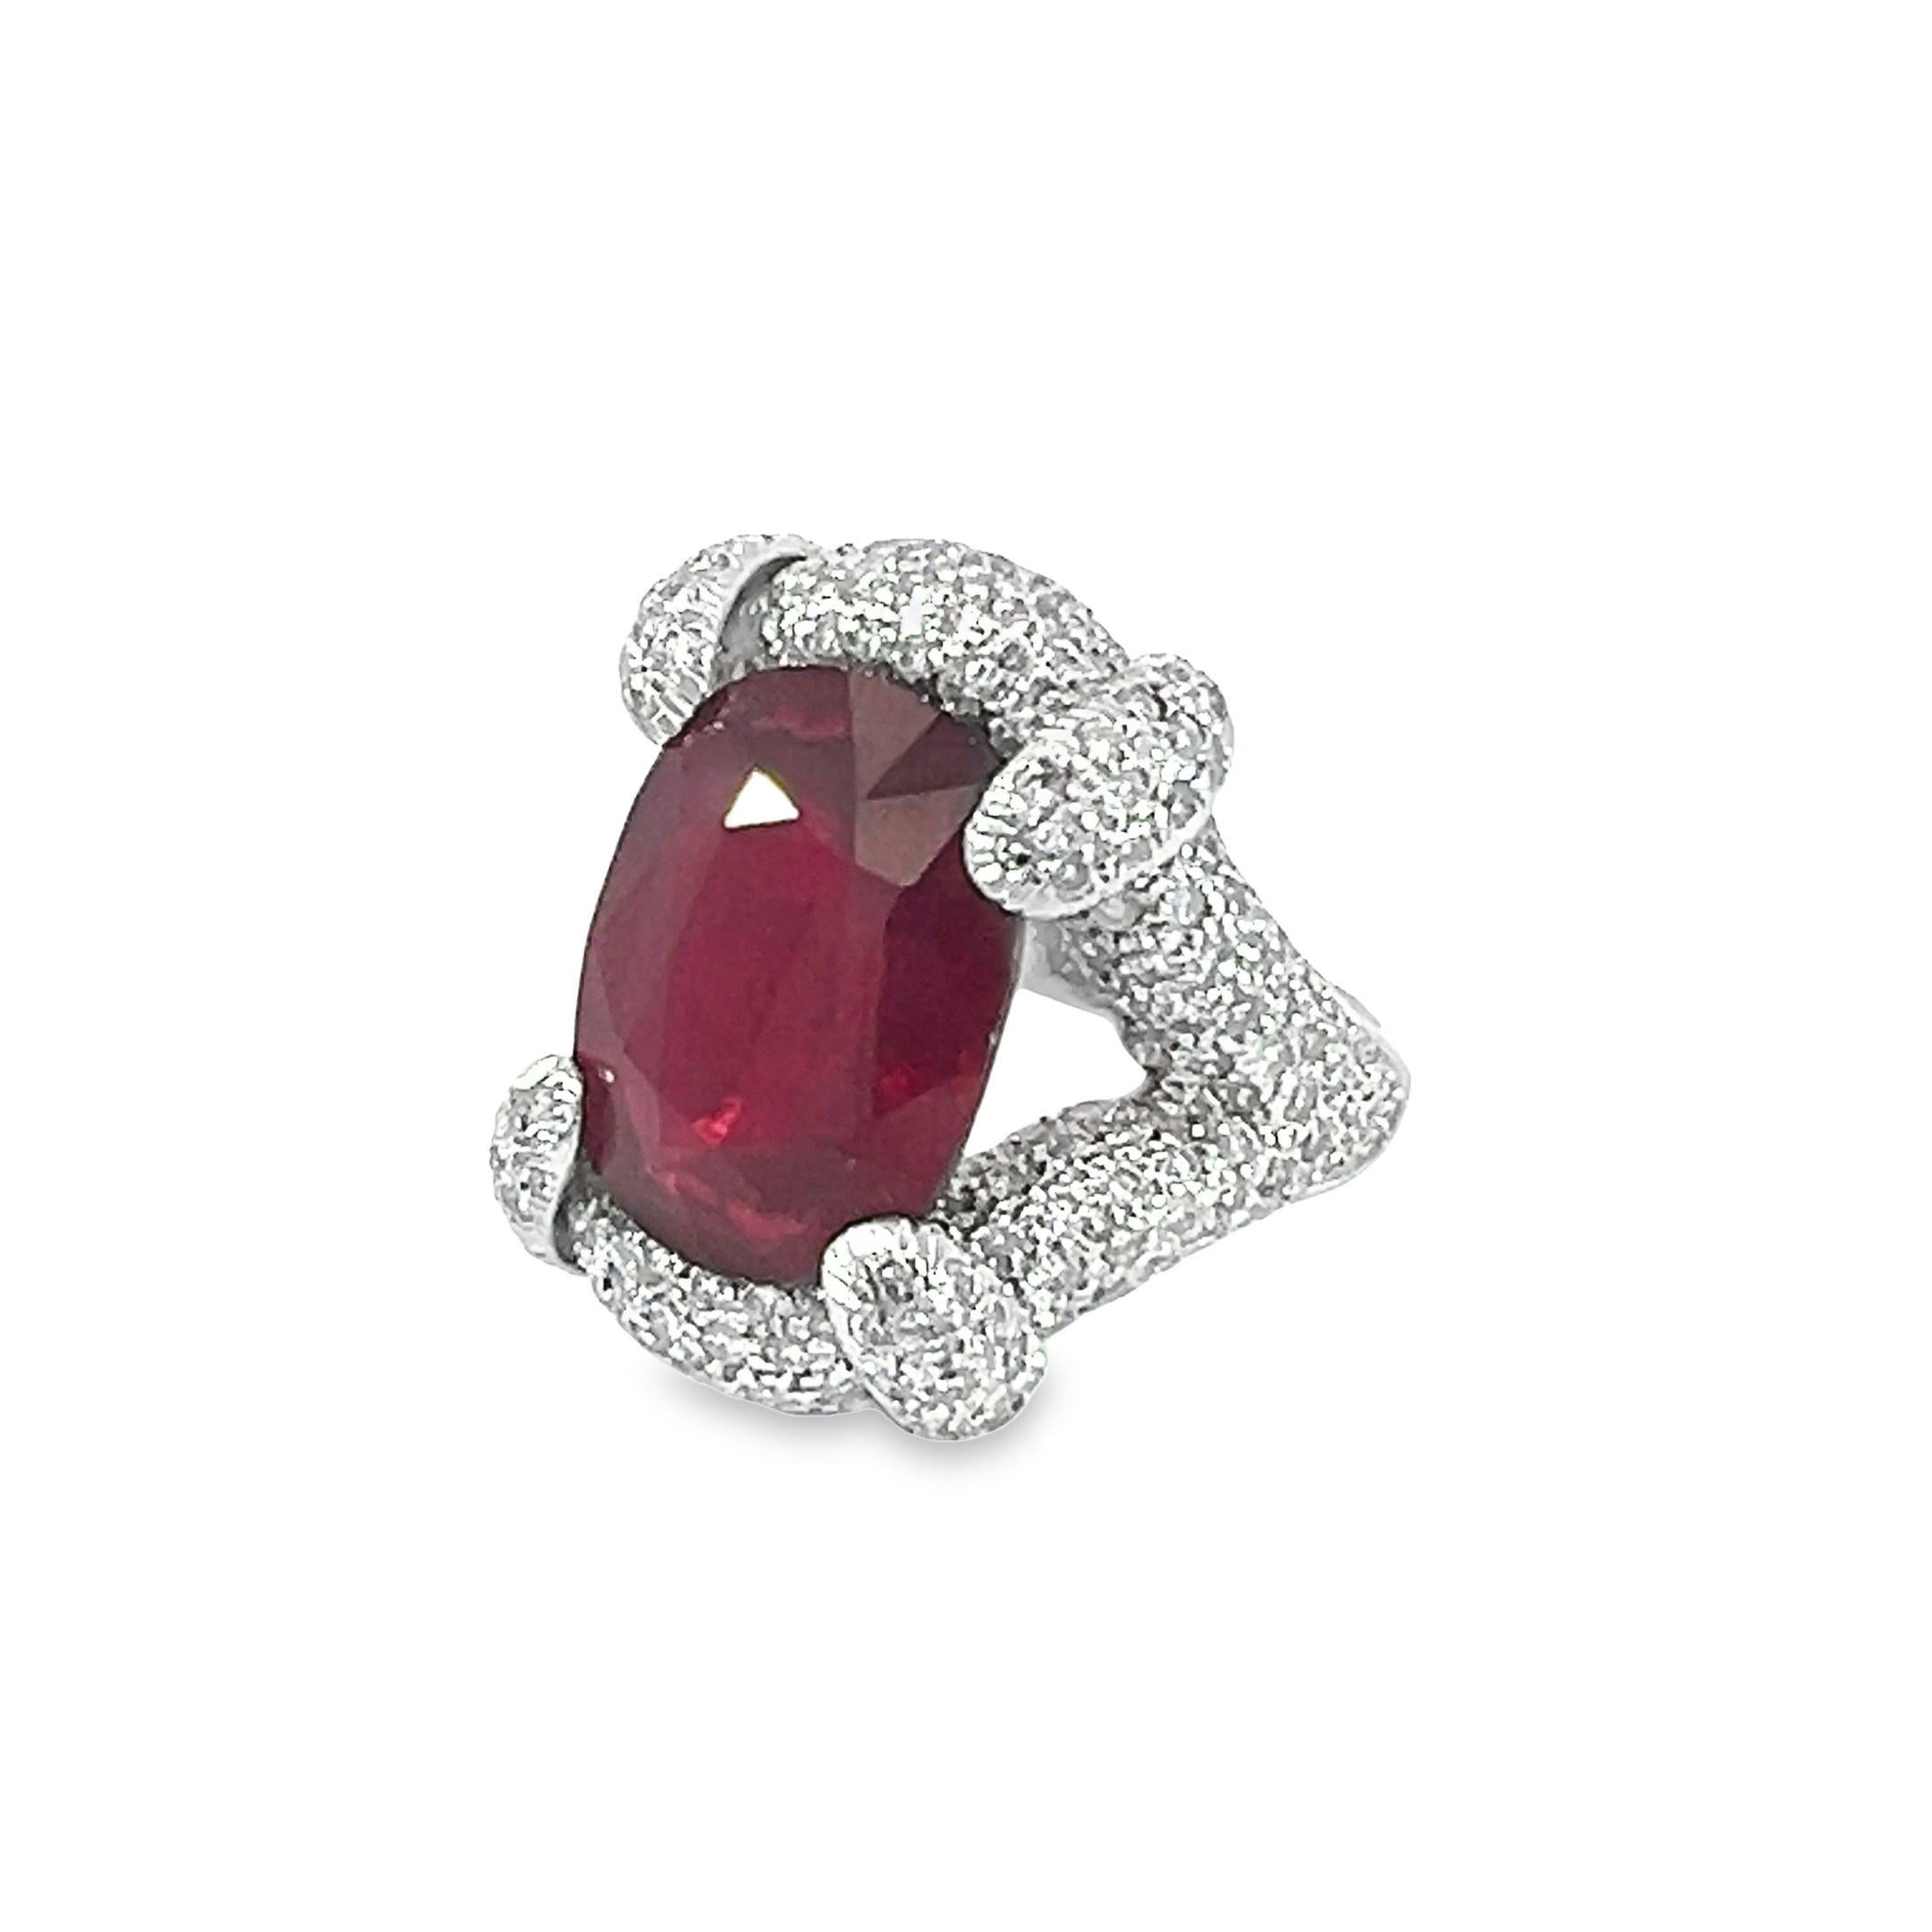 A beautiful natural glass filled Ruby Diamond ring set in 18Kt gold For Sale 2